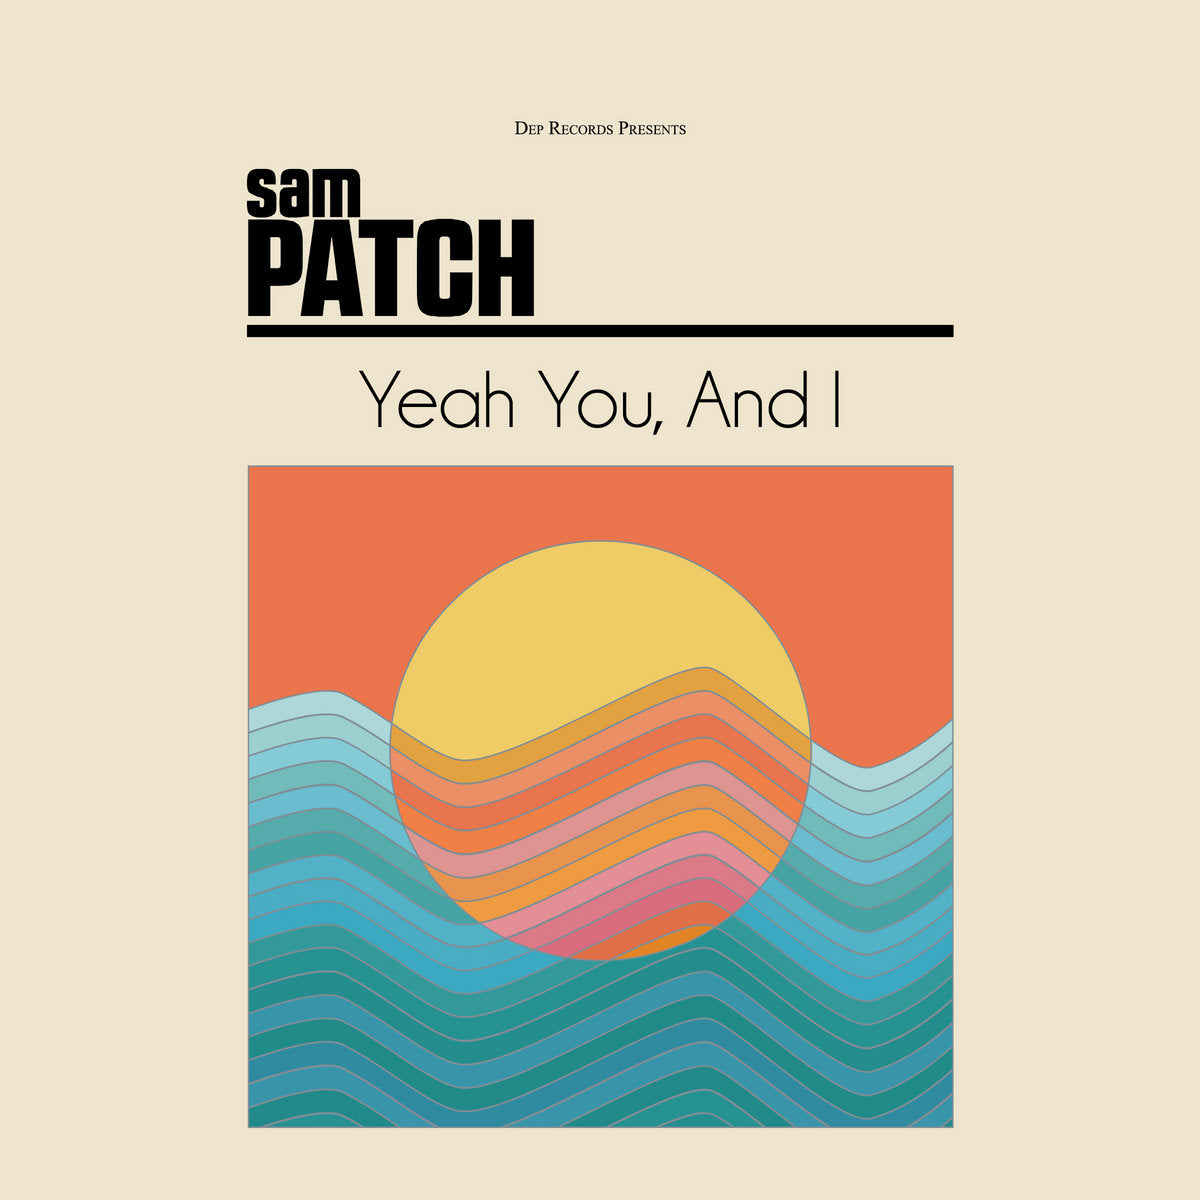 Sam Patch - Yeah You, and I (Vinyl LP)